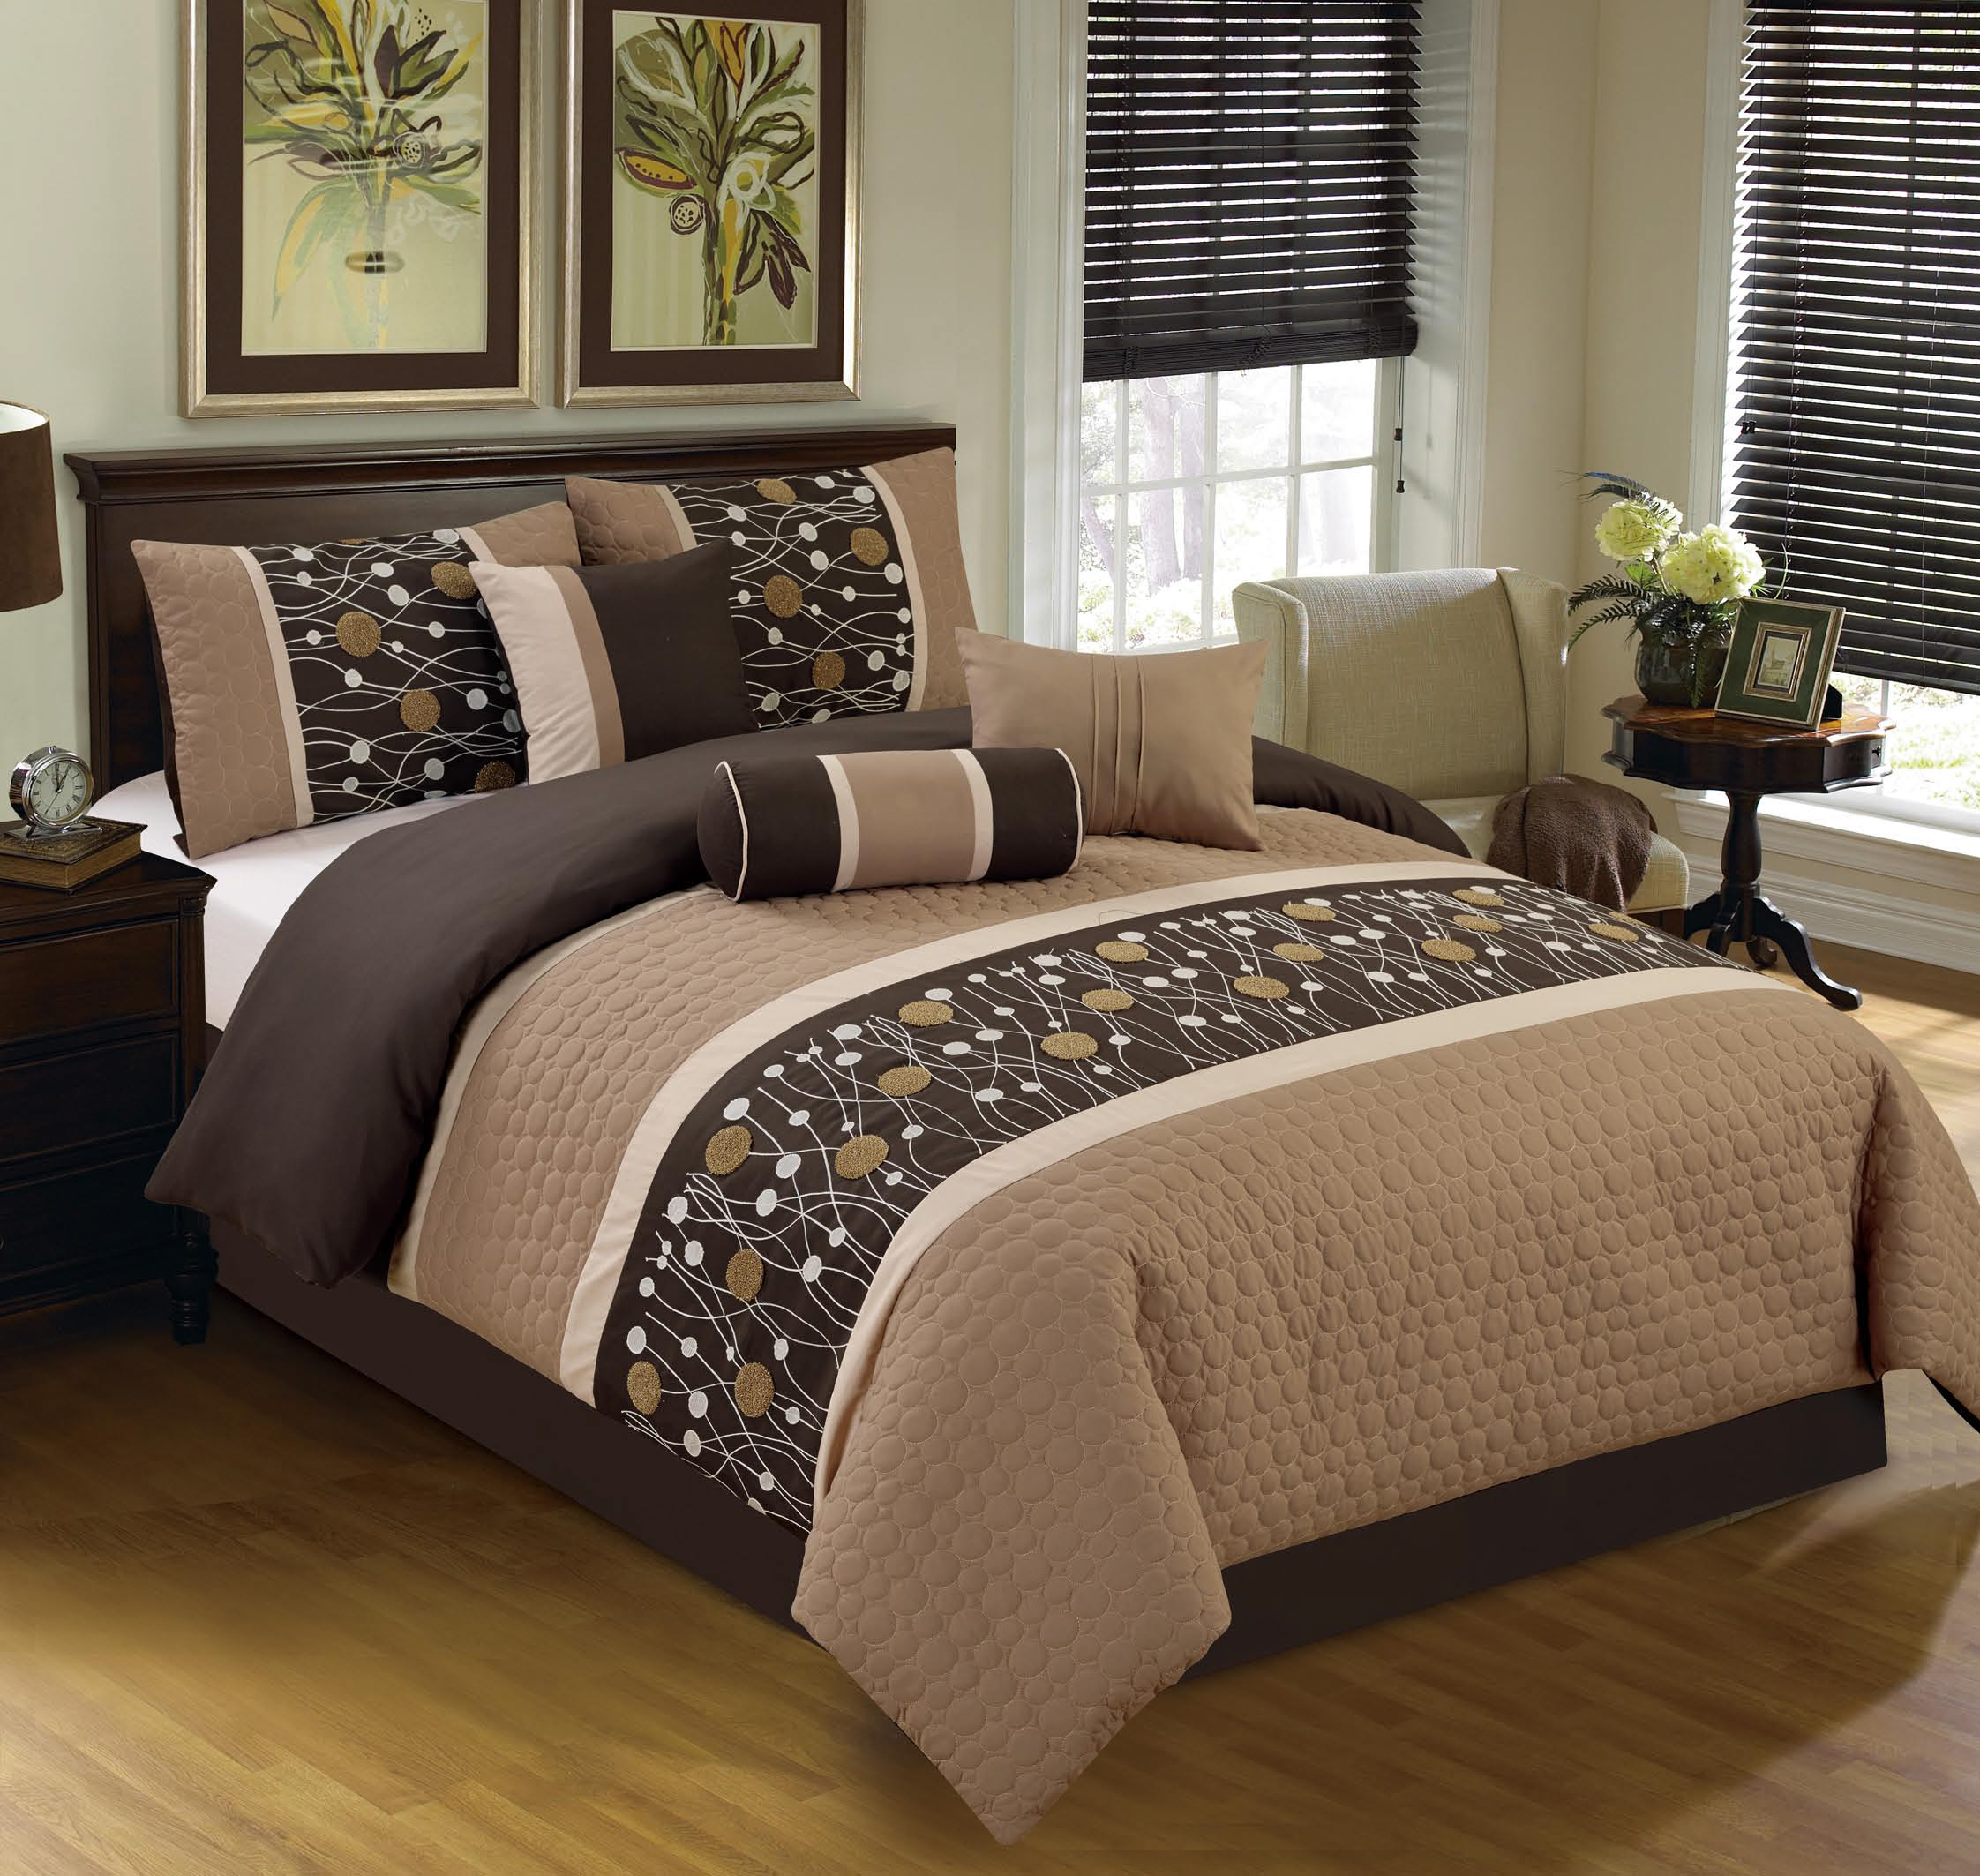 20825 Queen Chinensis Embrodiery, Queen Size Comforter Set - 7 Piece